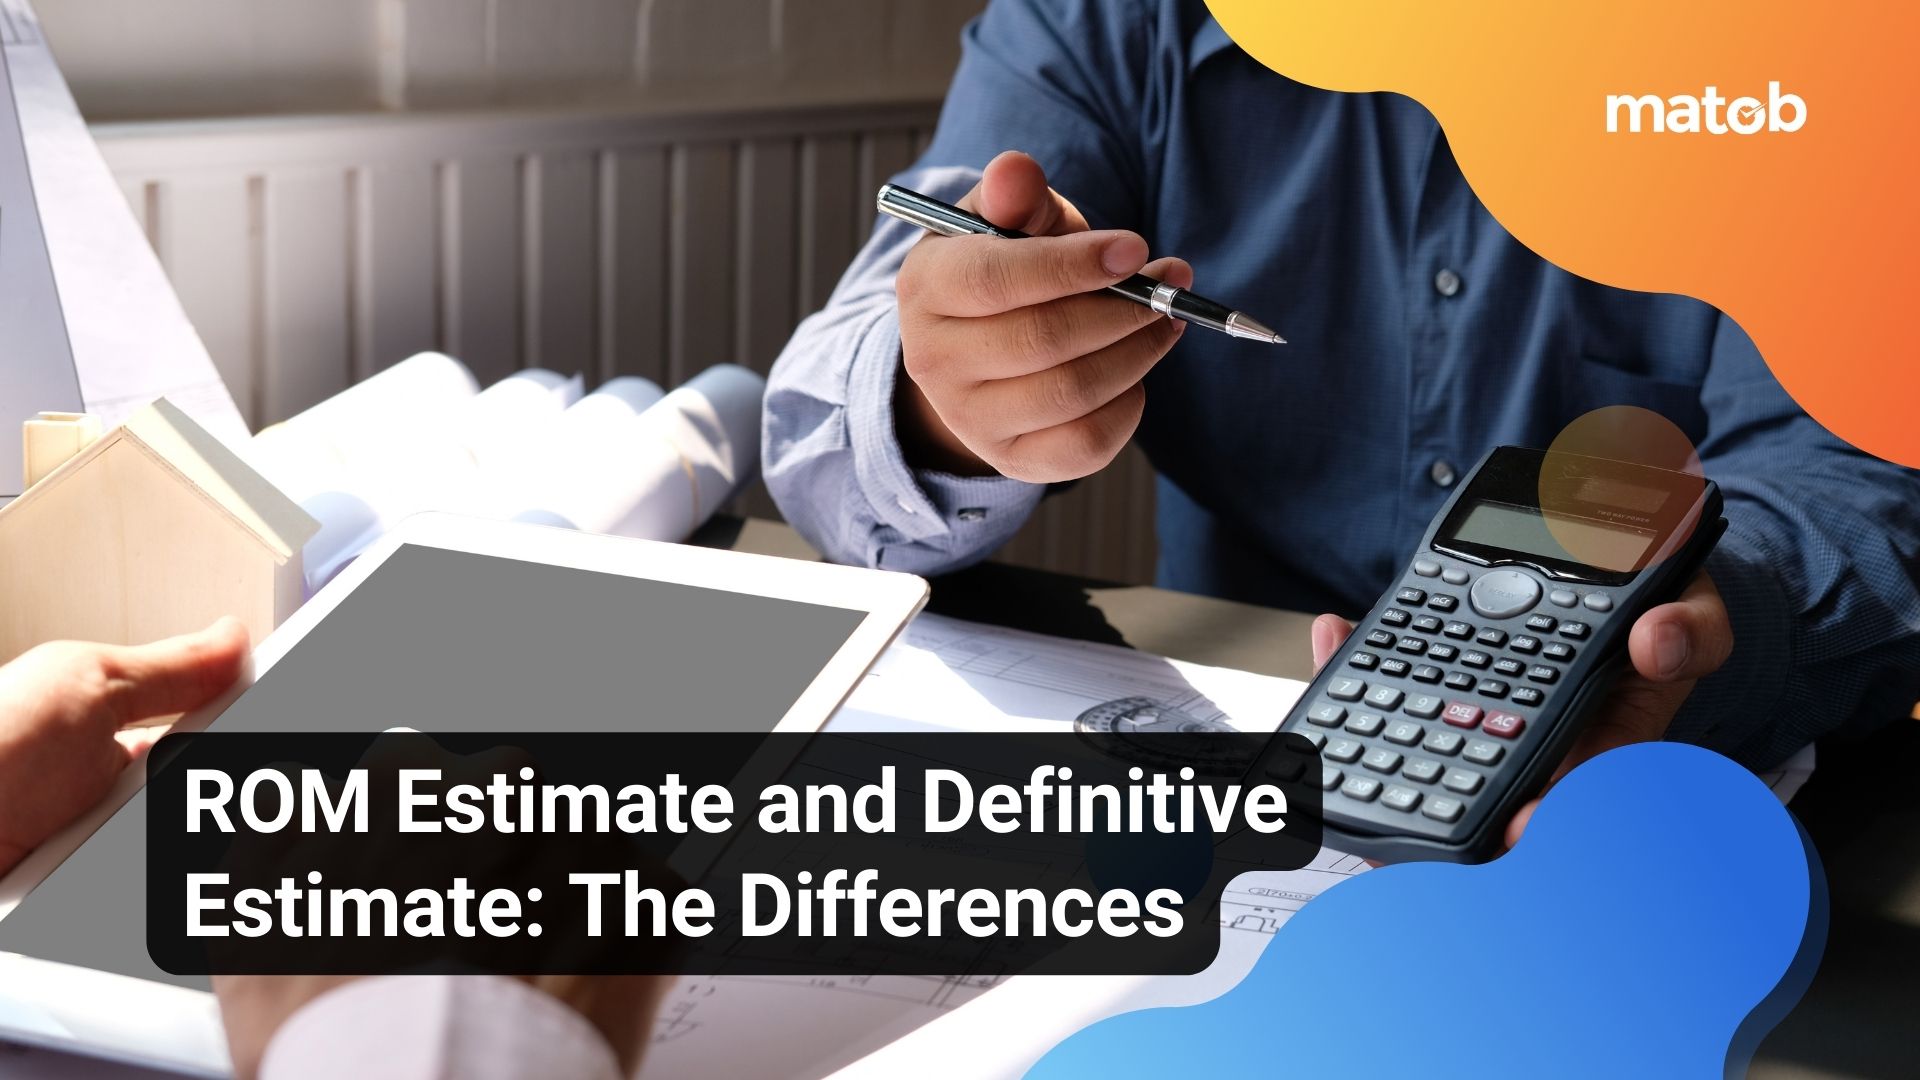 ROM Estimate and Definitive Estimate: The Differences